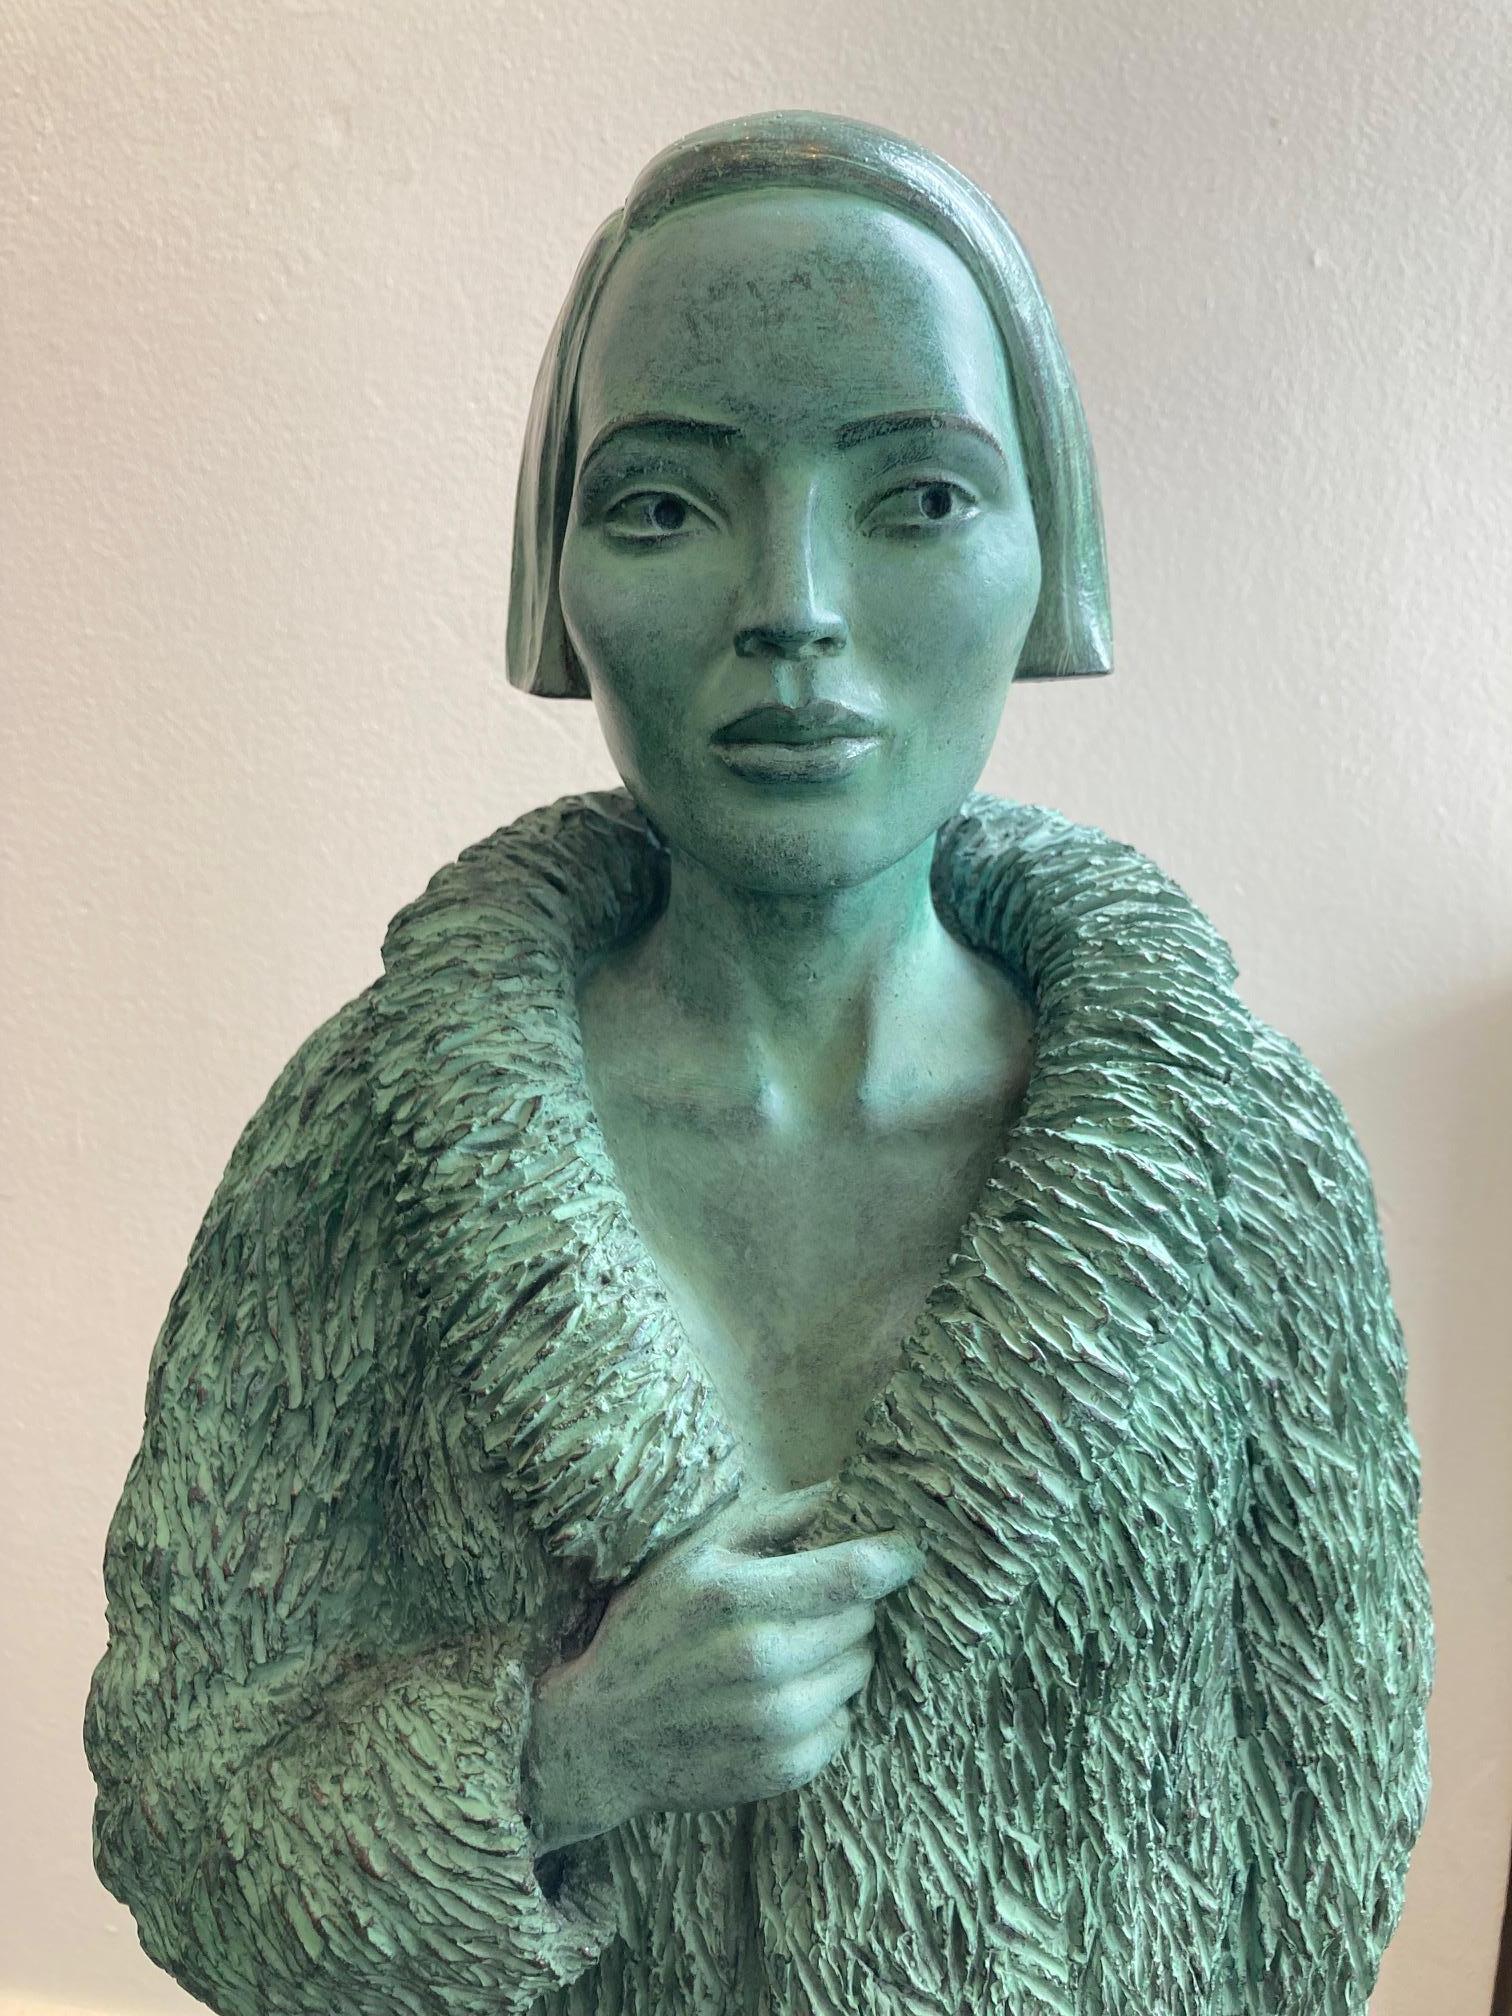 Vrouw met Bontjas Woman in Fur Bronze Sculpture Contemporary Green Cigarette 
The statues of Erwin Meijer are subtle with a recognizable, personal handwriting.
They breathe the atmosphere of a narrative poem, where the reader not only encounters the